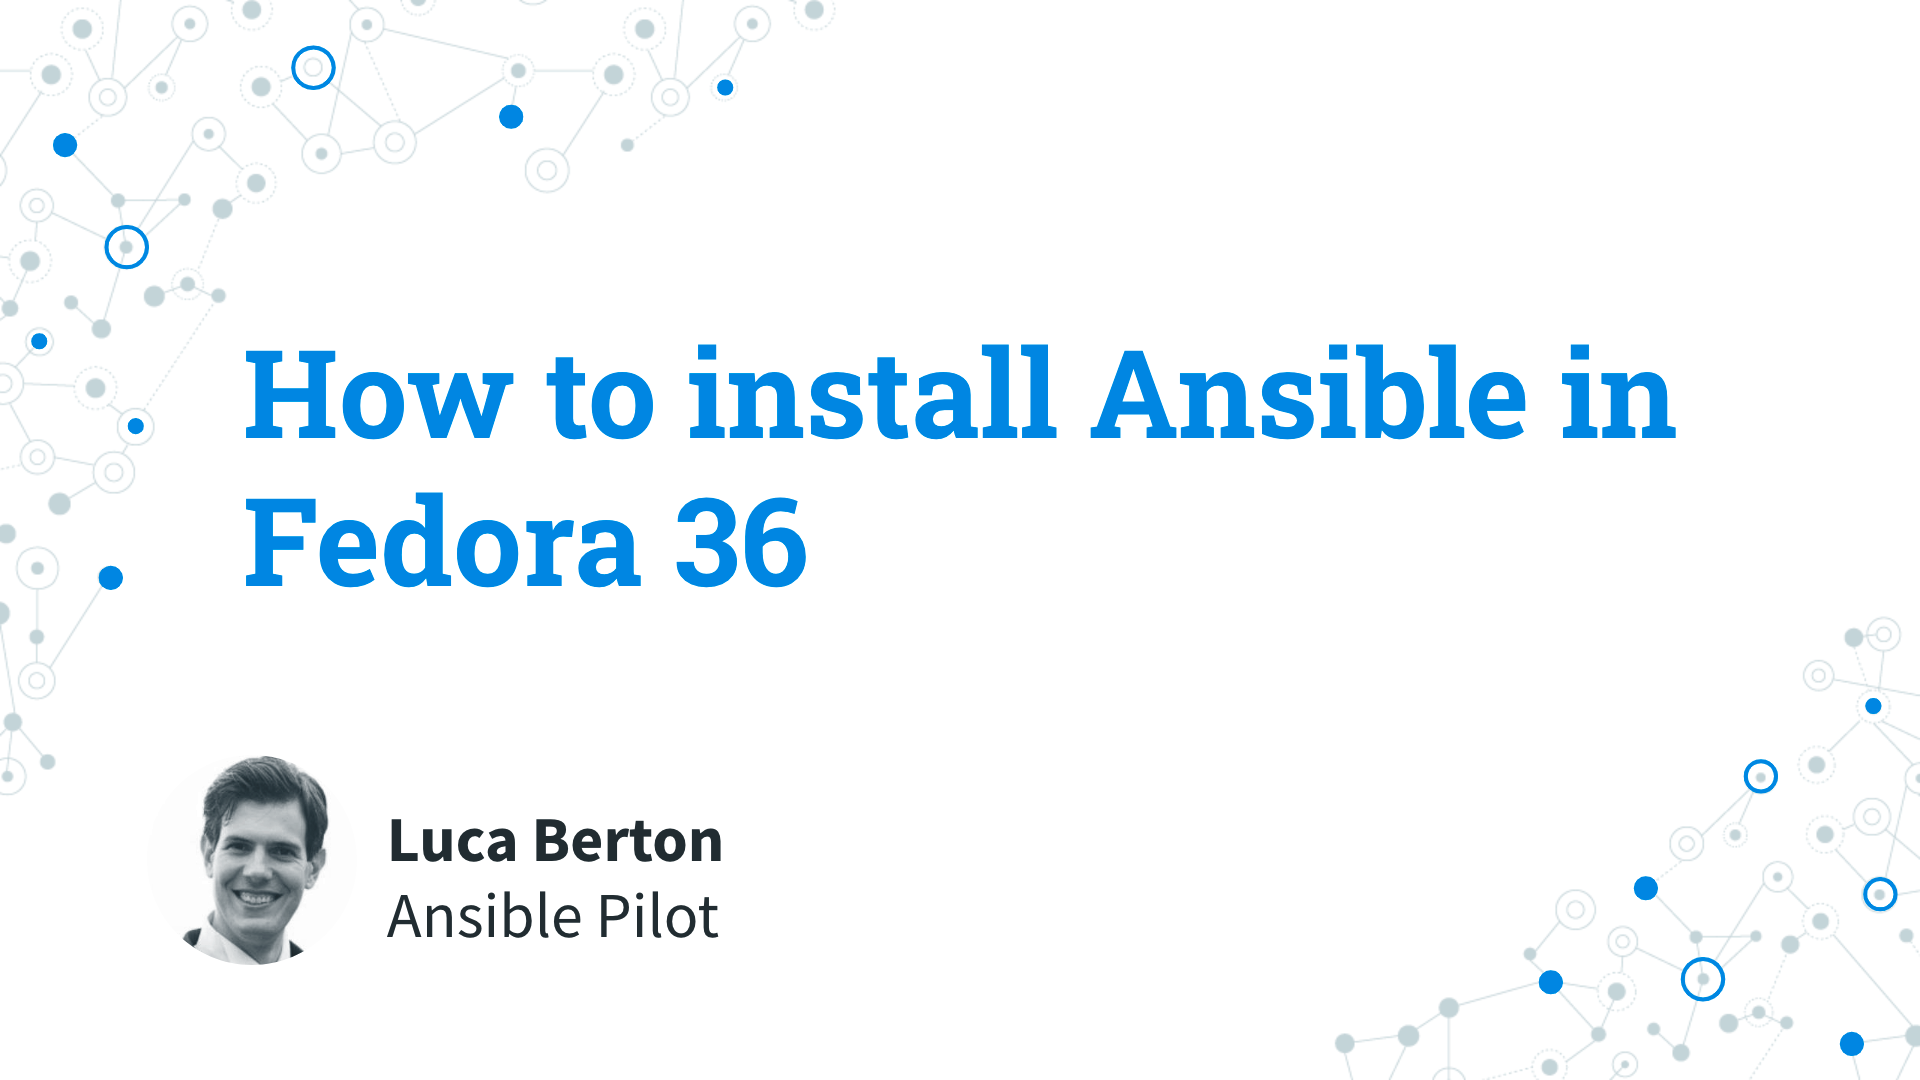 How to install Ansible in Fedora 36 - Ansible install